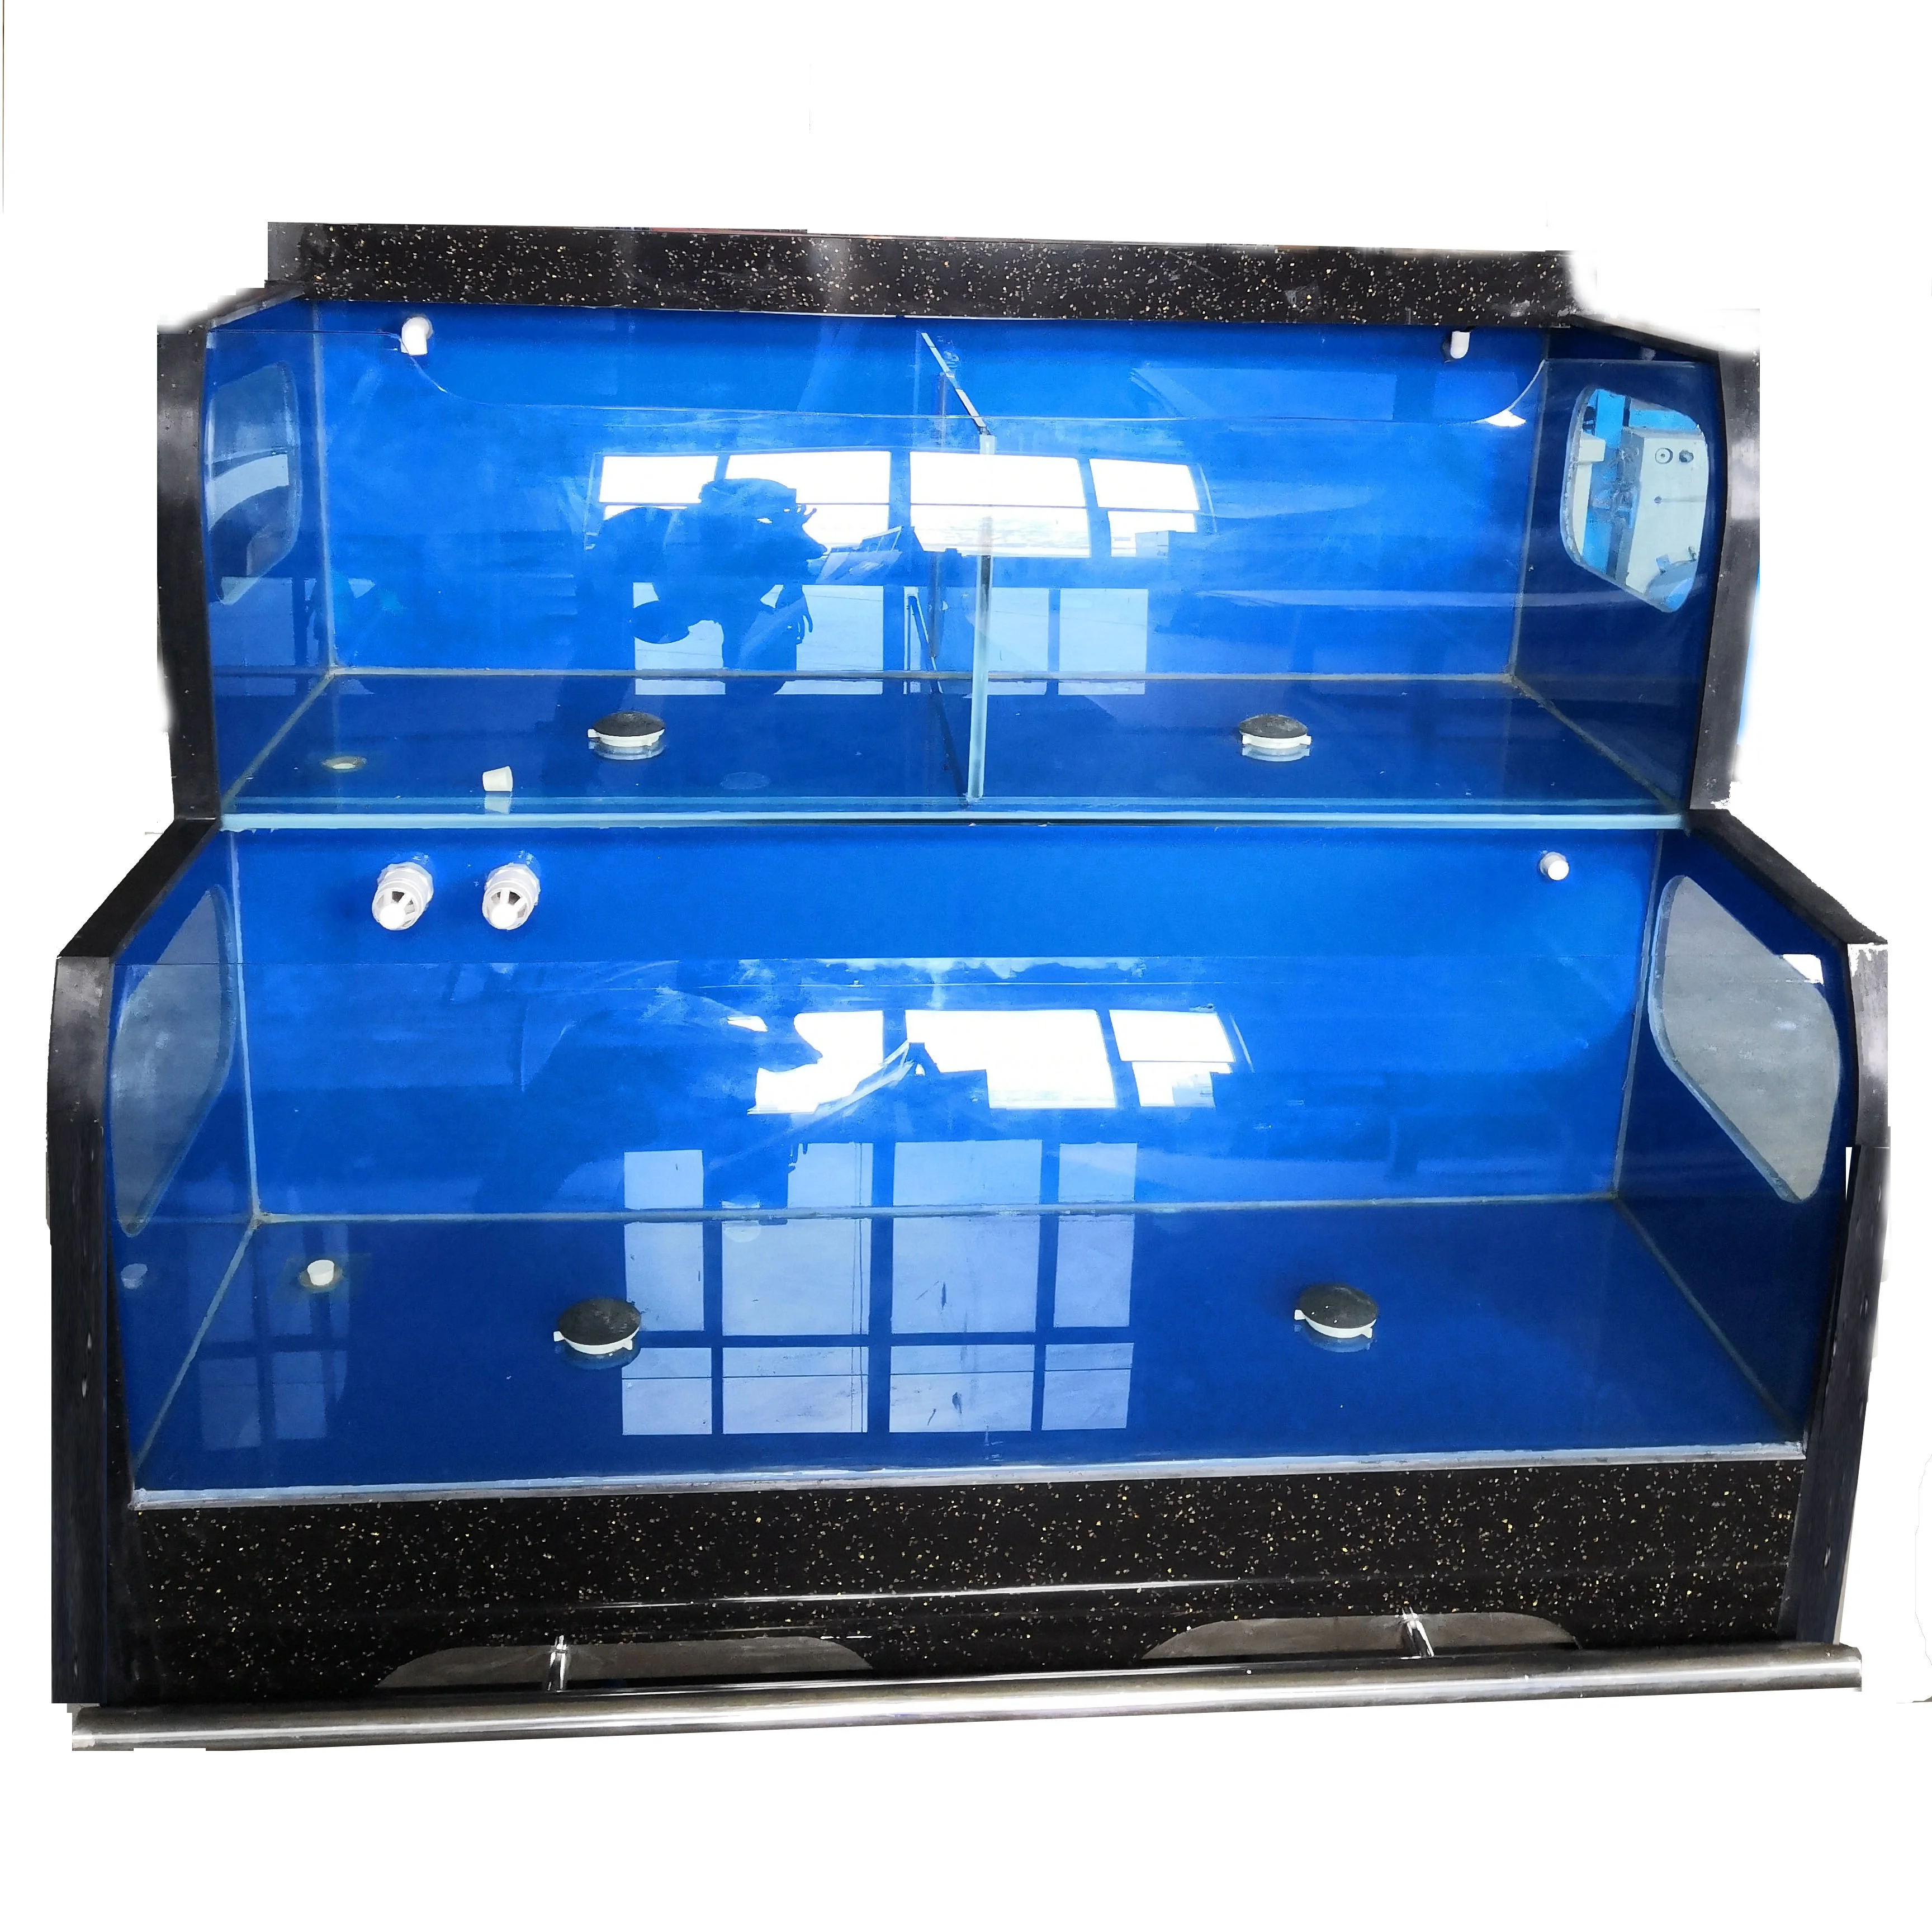 Df Luxury Marble Decoration Supermarket Restaurant Chiller Seafood Lobster Tank Buy Cold Water Fish Holding Tanks Mud Crab Red Snow Crab Dungeness Fish Tank Aquarium Freshwater Salted Shrimp Acrylic Custom Fish Tanks [ 3456 x 3456 Pixel ]